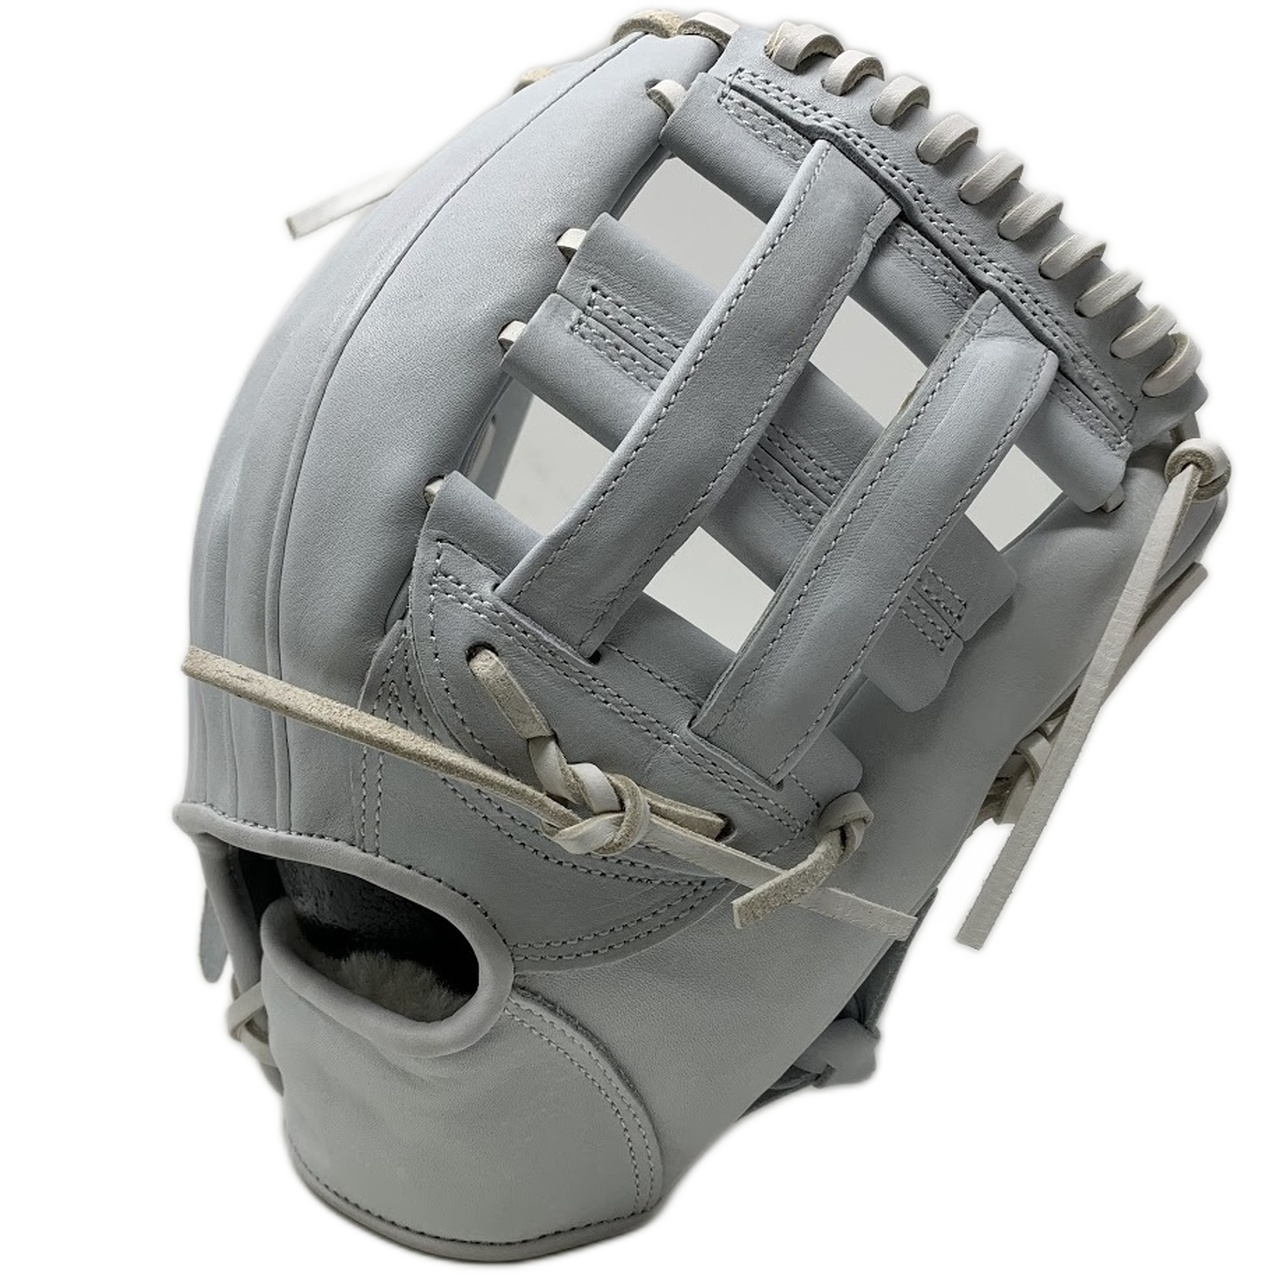 build-your-own-custom-baseball-glove Design-your-own    Let us build your own premium Kip leather glove for